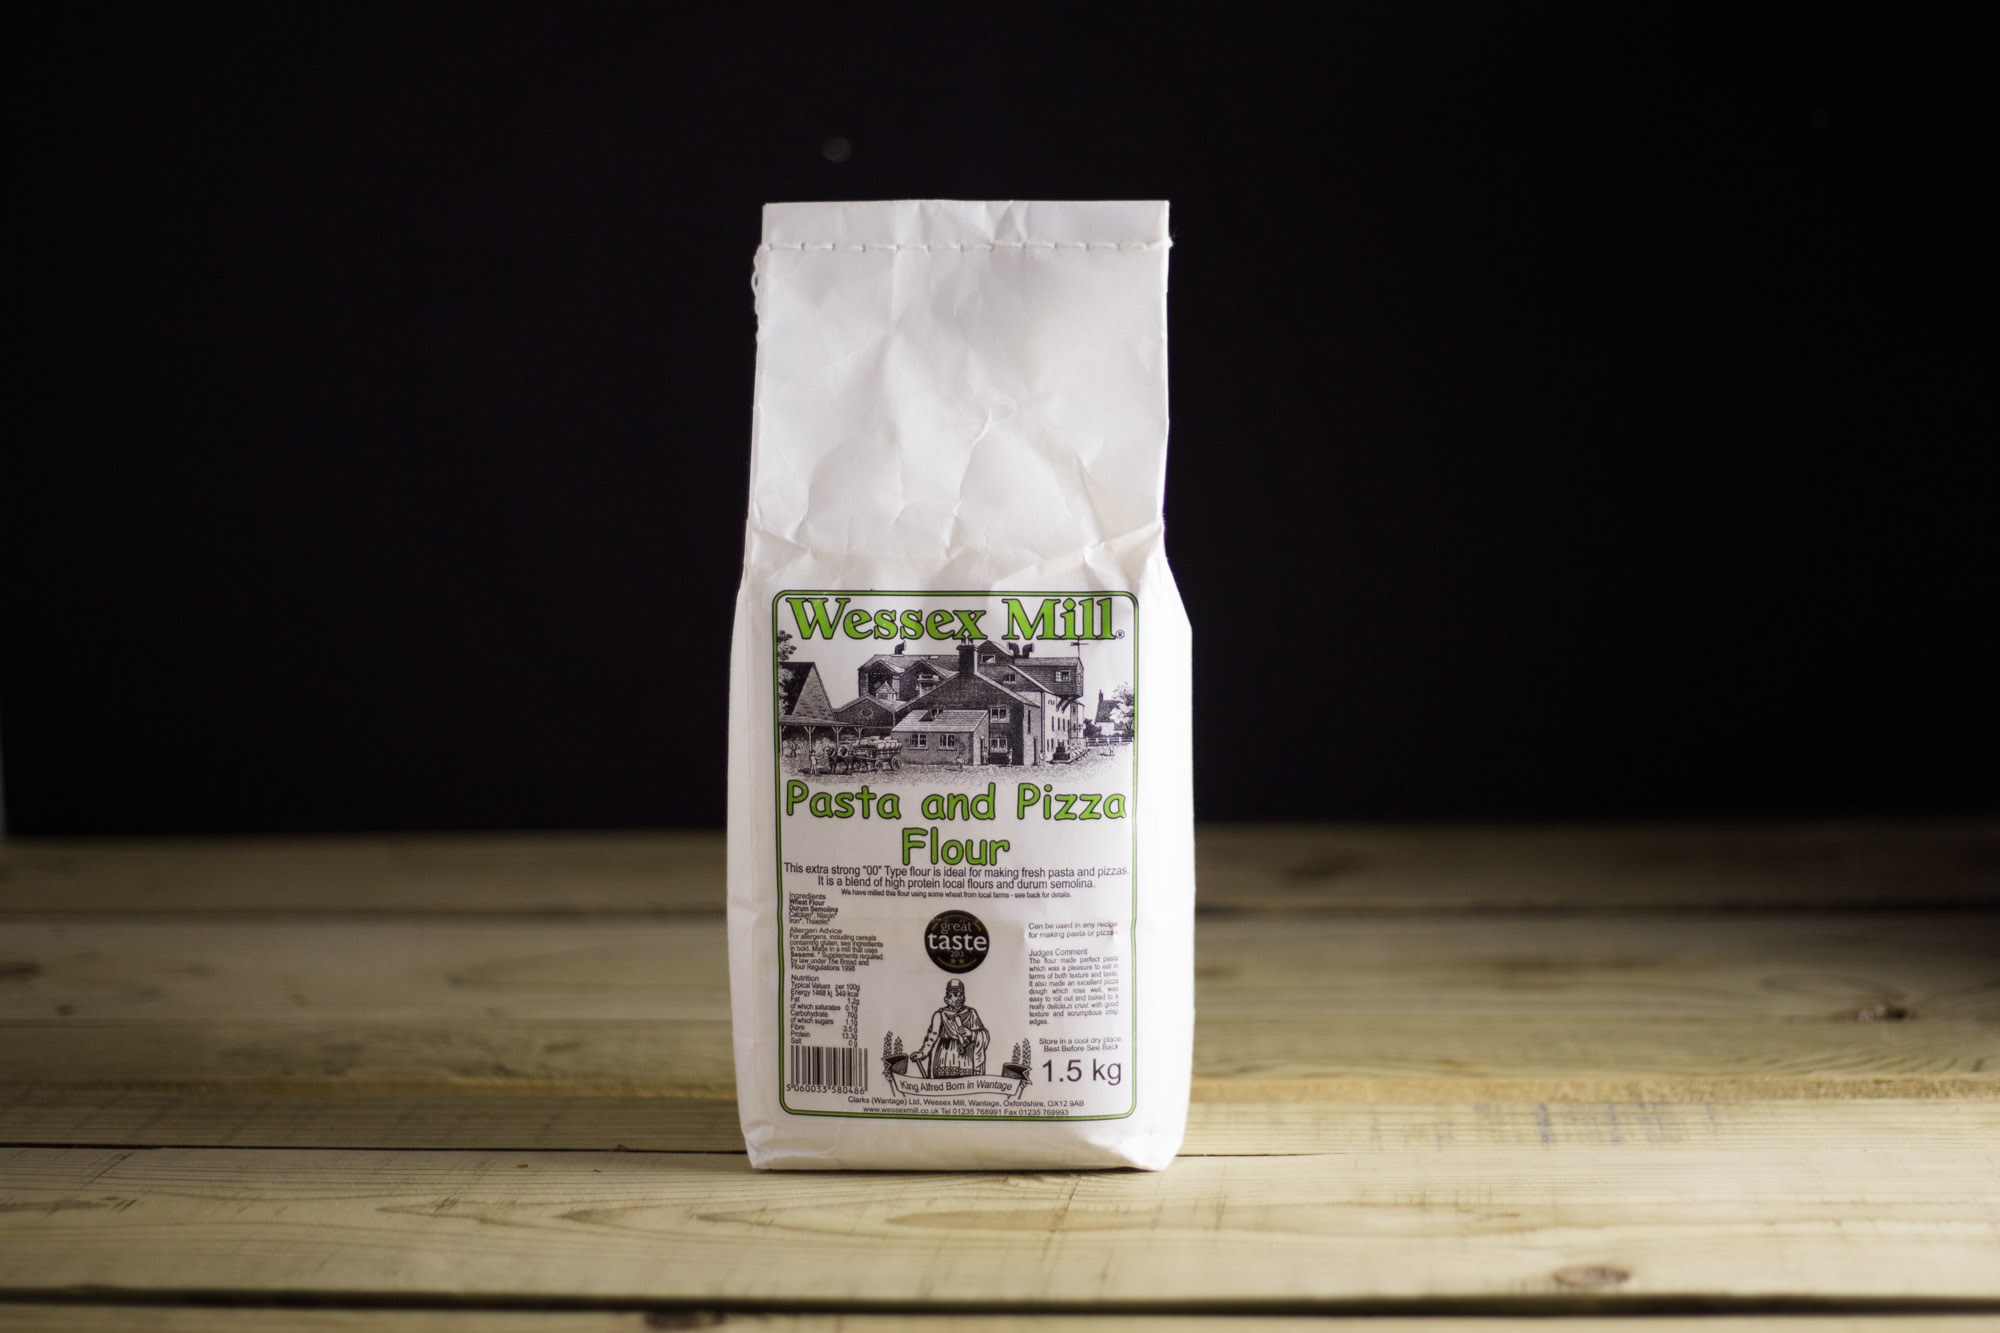 Wessex Mill Pasta and Pizza flour